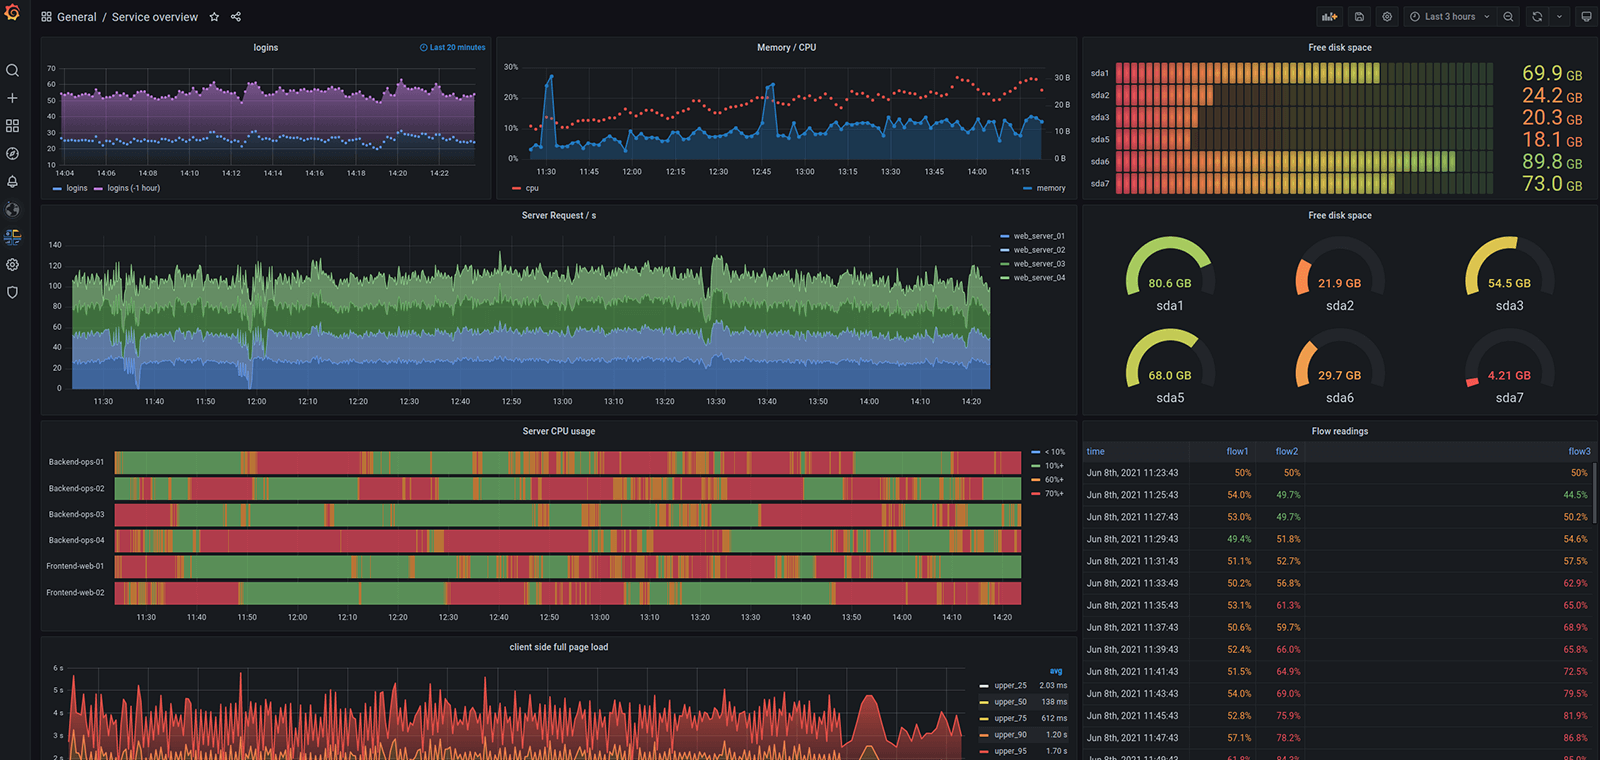 Build rich dashboards using multiple visualization options.